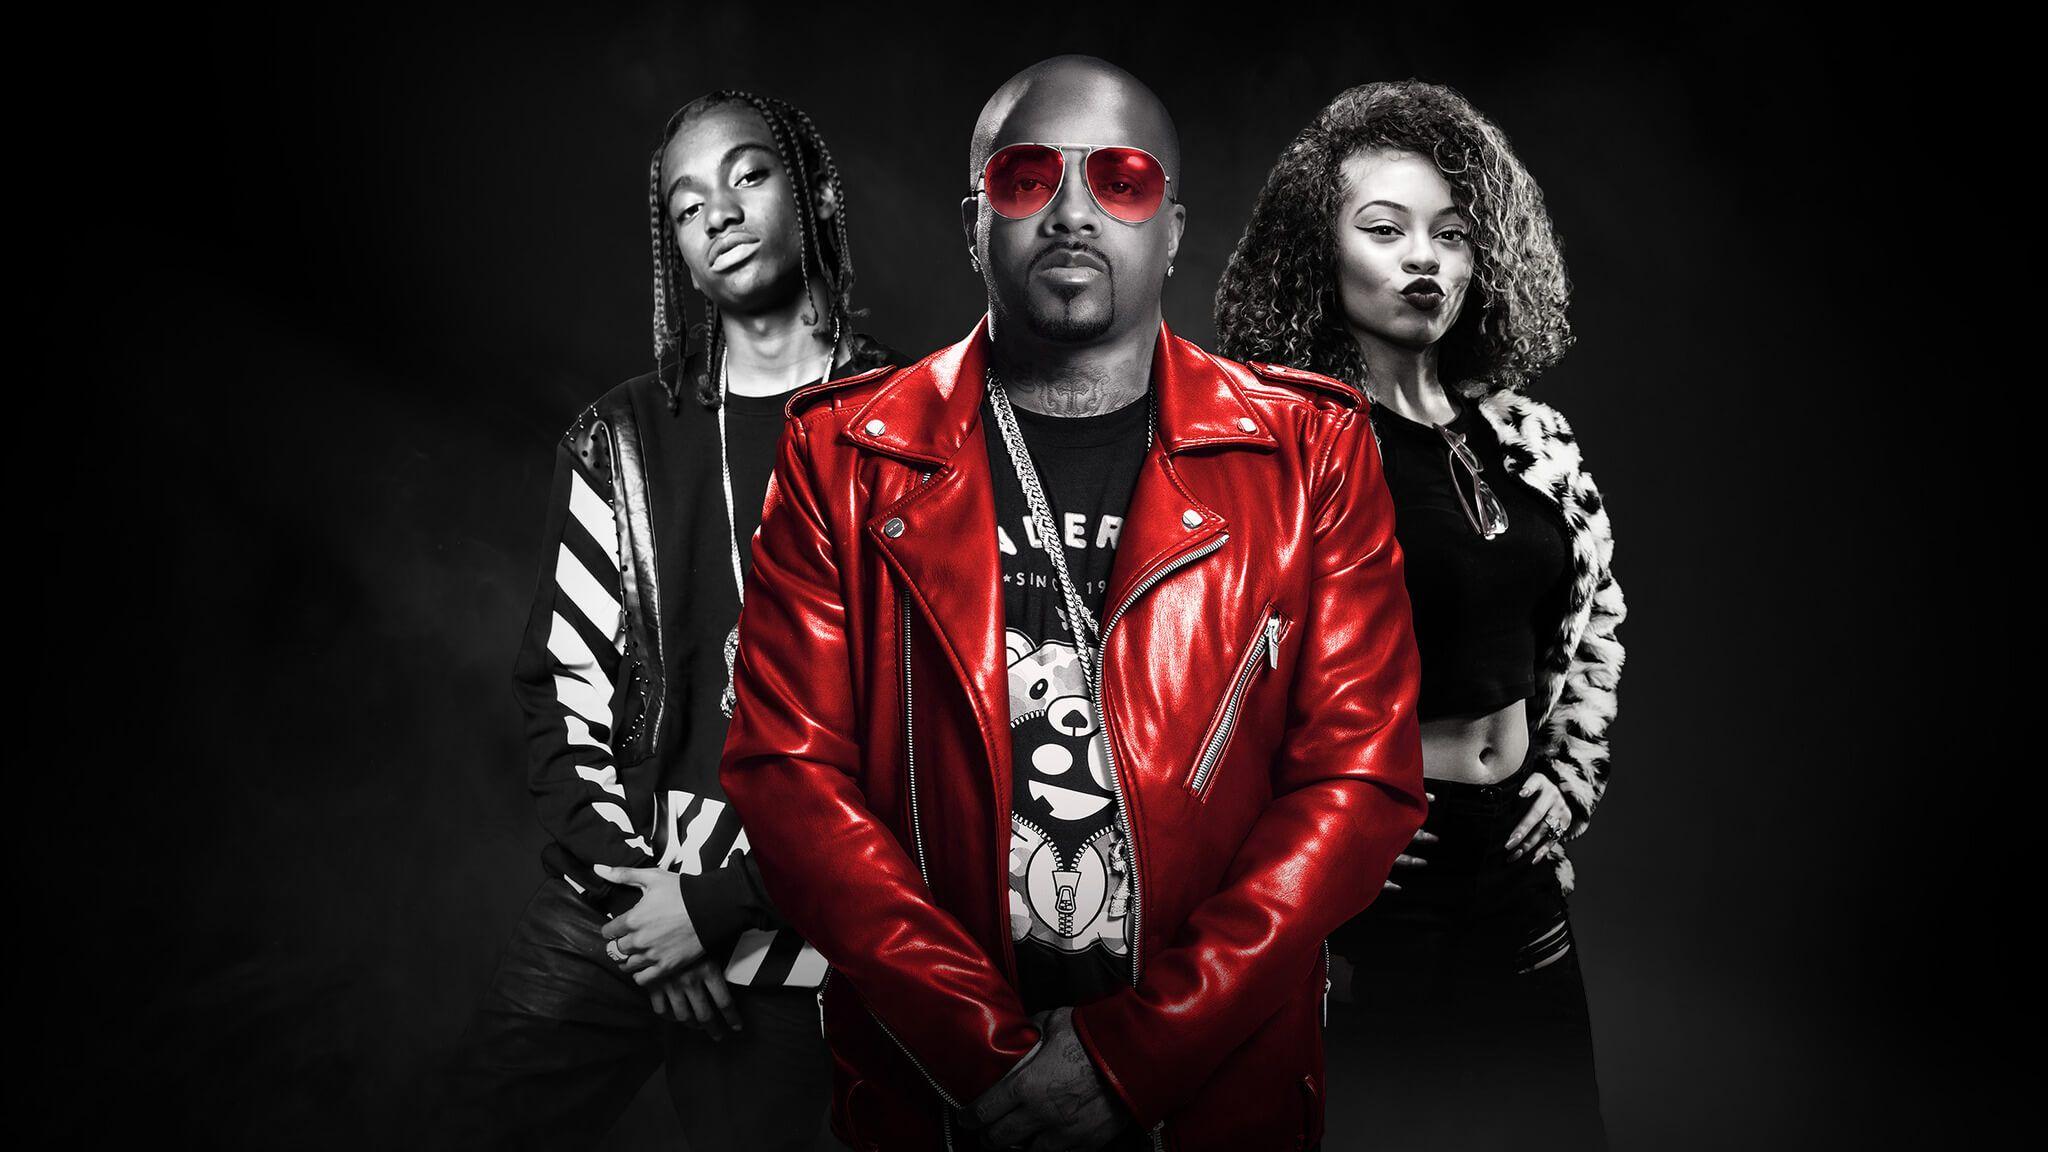 Jermaine Dupri Presents SoSoSUMMER 17 with The Rap Game and Miss